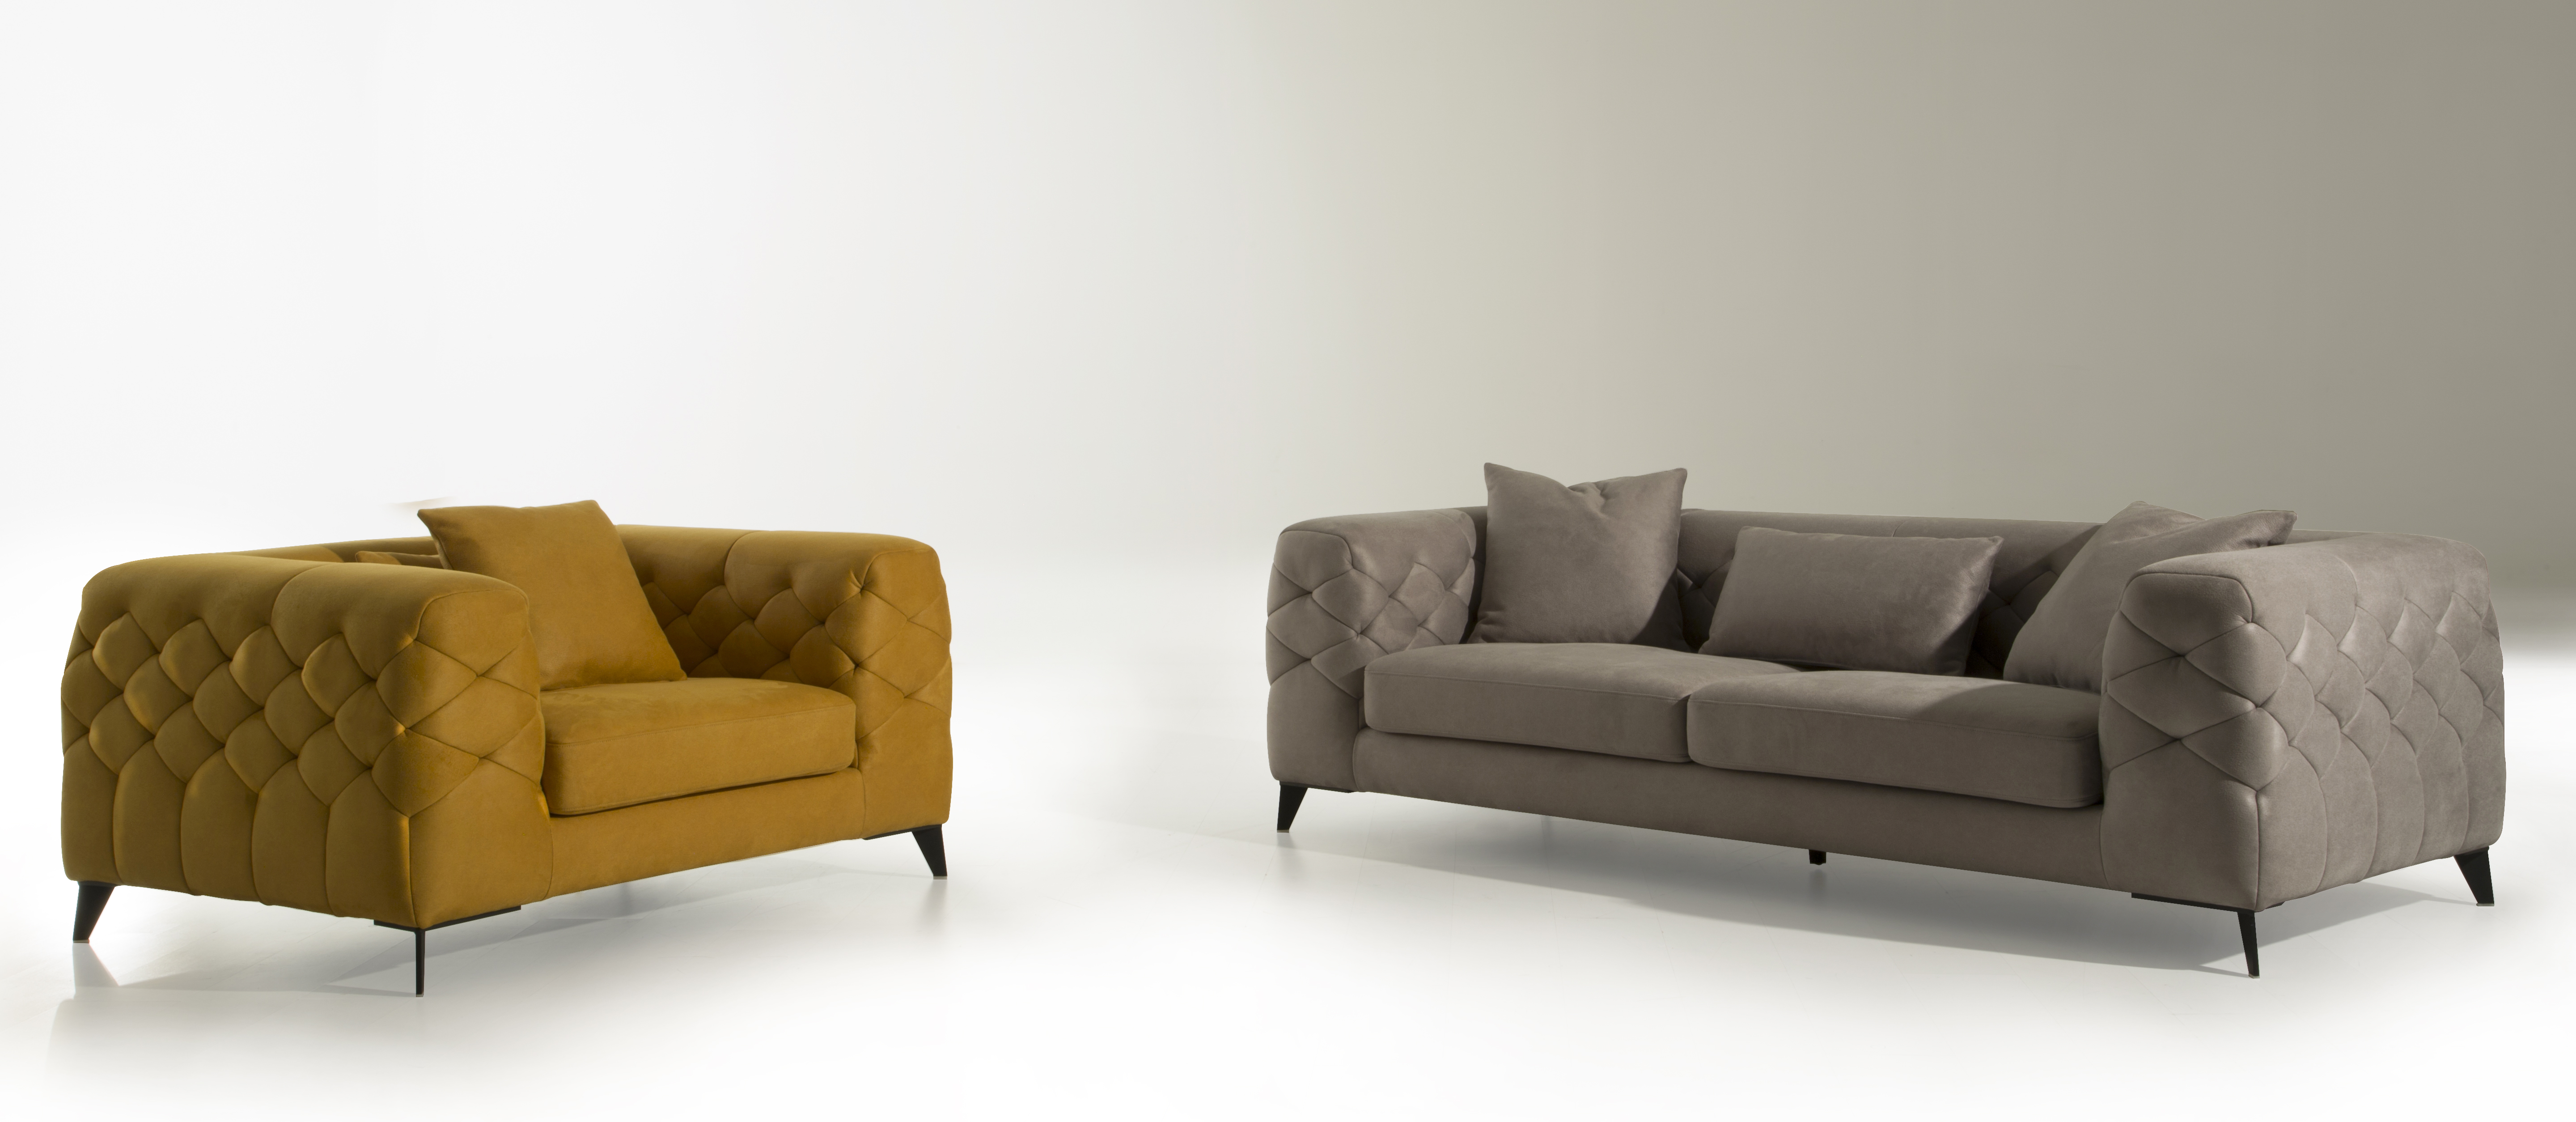 https://www.cocheen.com/product/navy-good-quality-big-sectional-sofa/ 